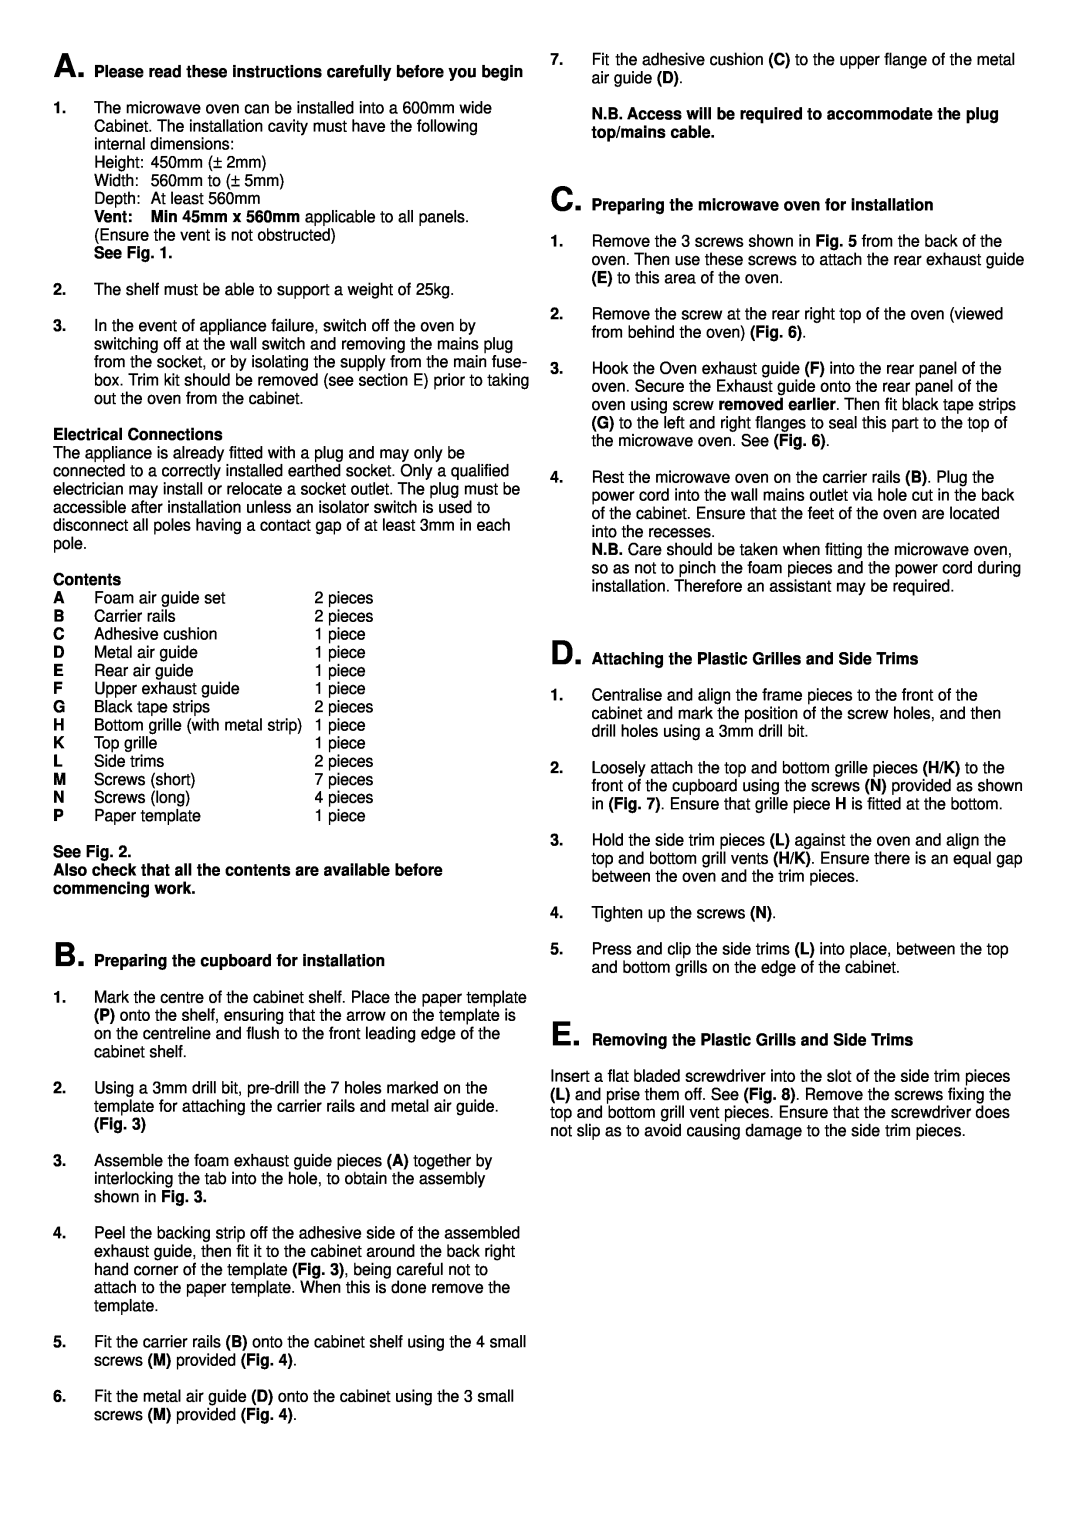 Hotpoint 6675 installation instructions A. Please read these instructions carefully before you begin 